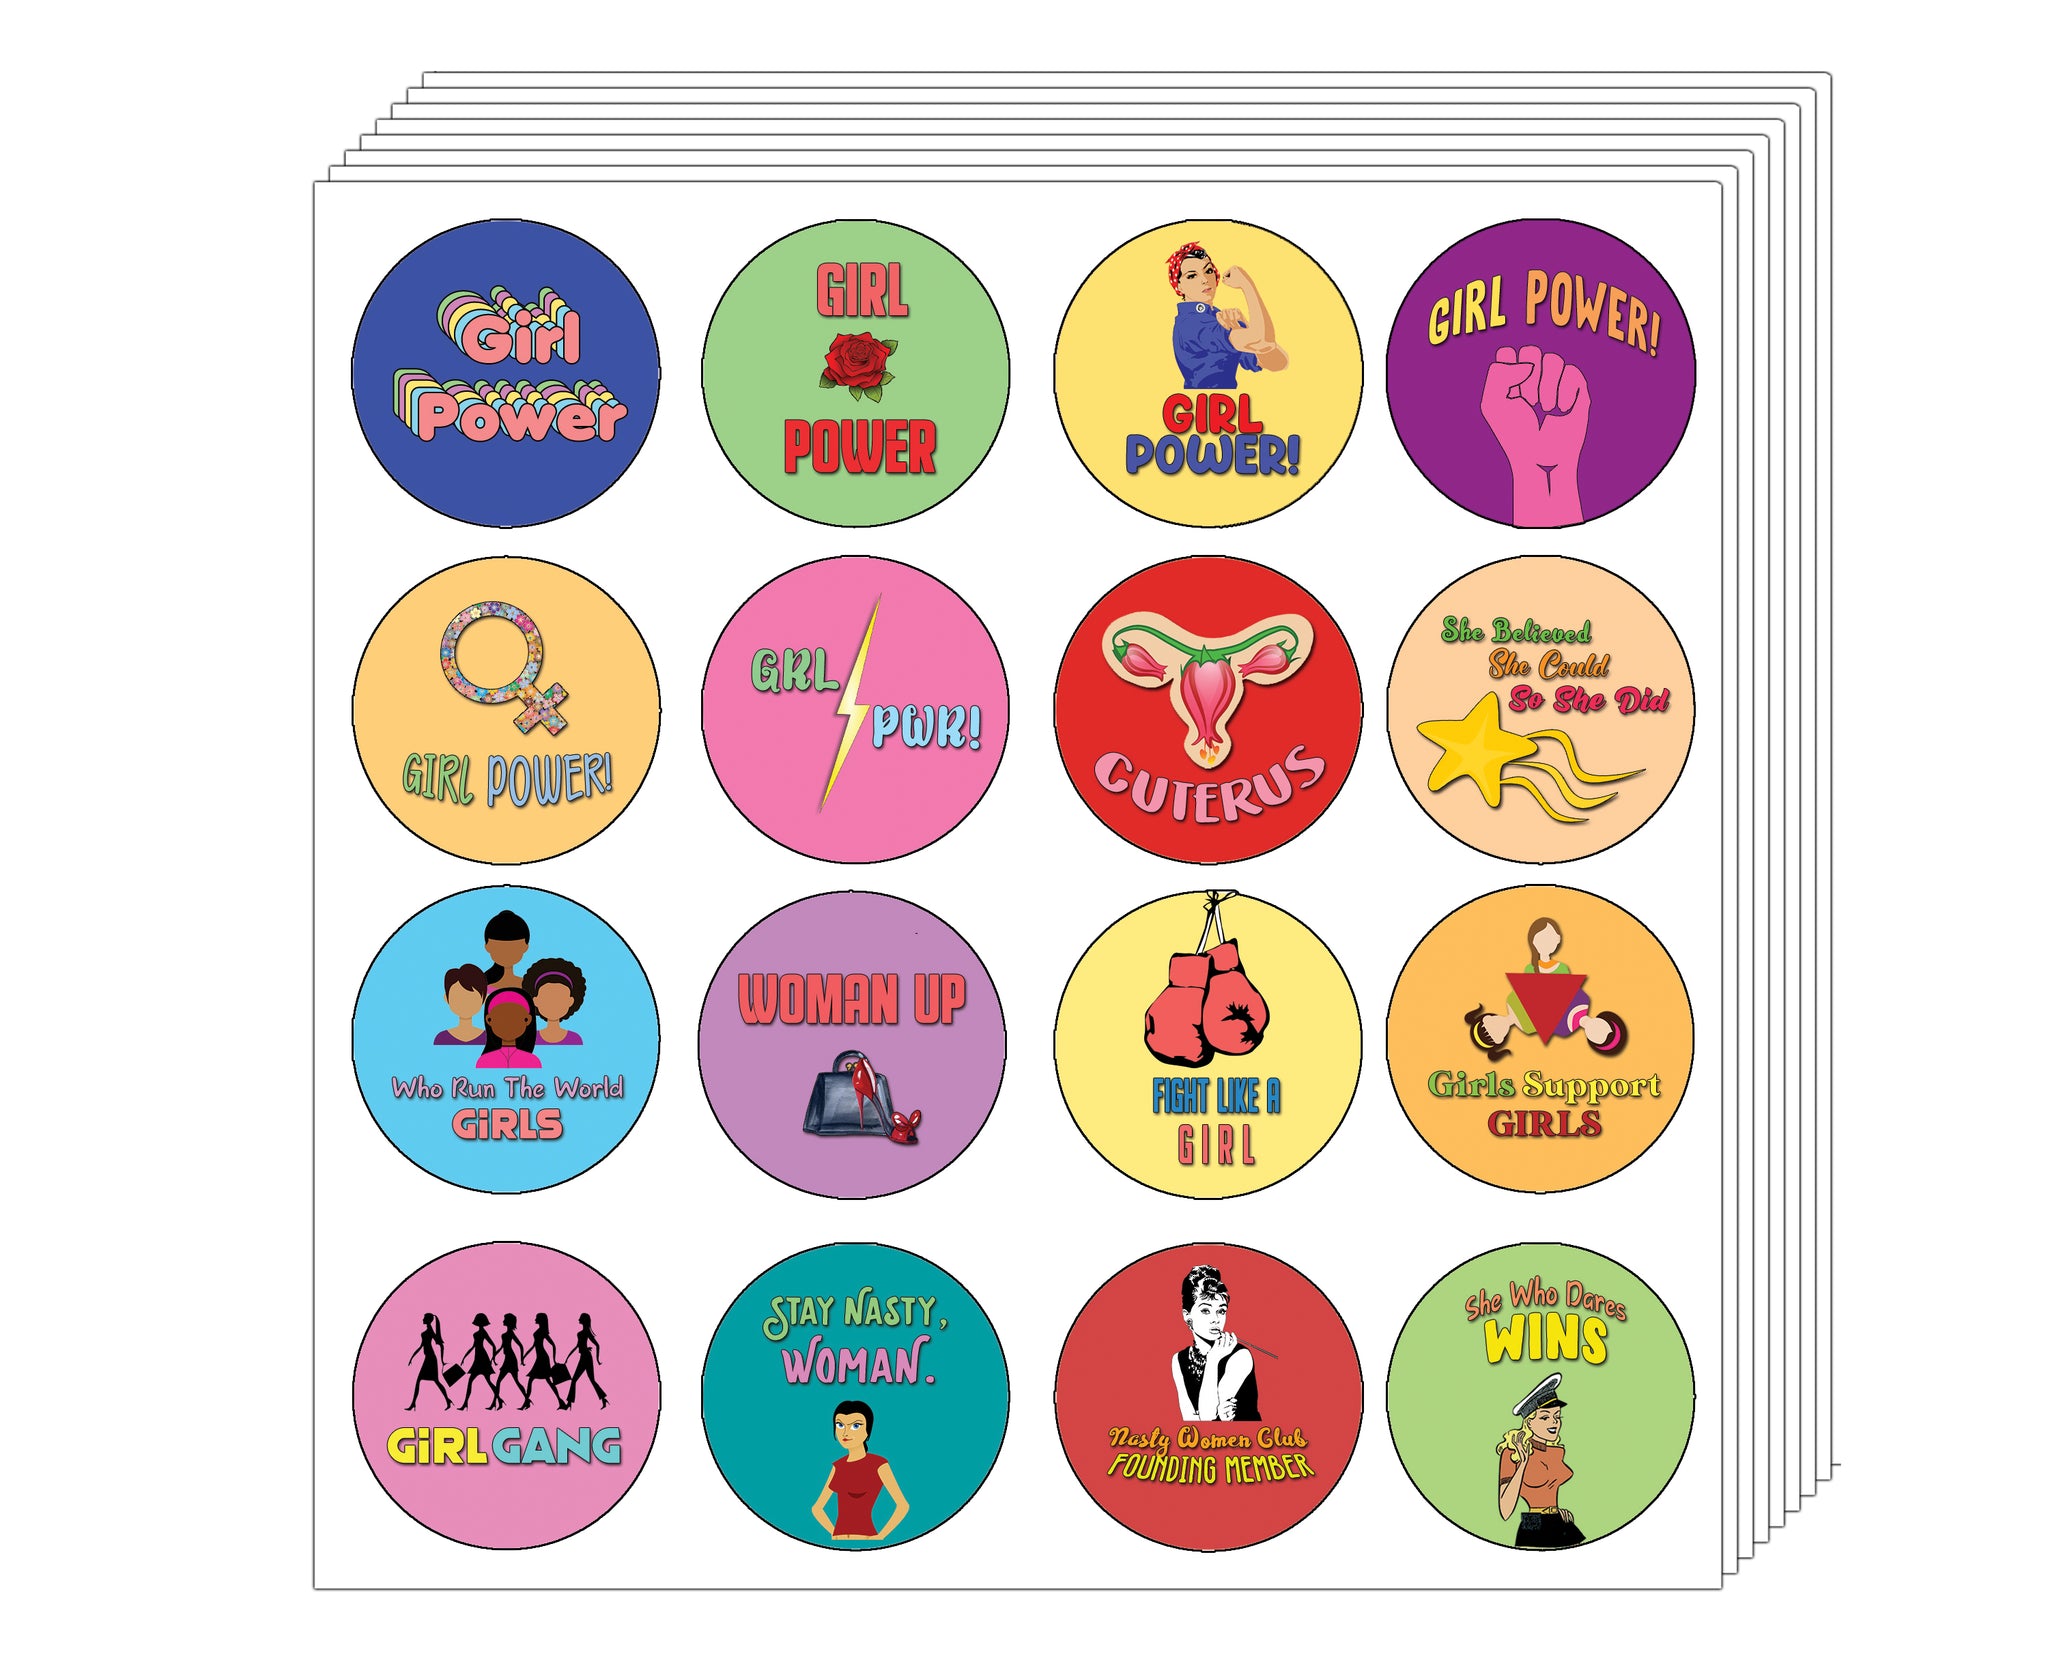 Creanoso Girl Power Stickers (20-Sheet) - Premium Quality Gift Ideas for Female Children, Teens, & Adults for All Occasions - Stocking Stuffers Party Favor & Giveaways